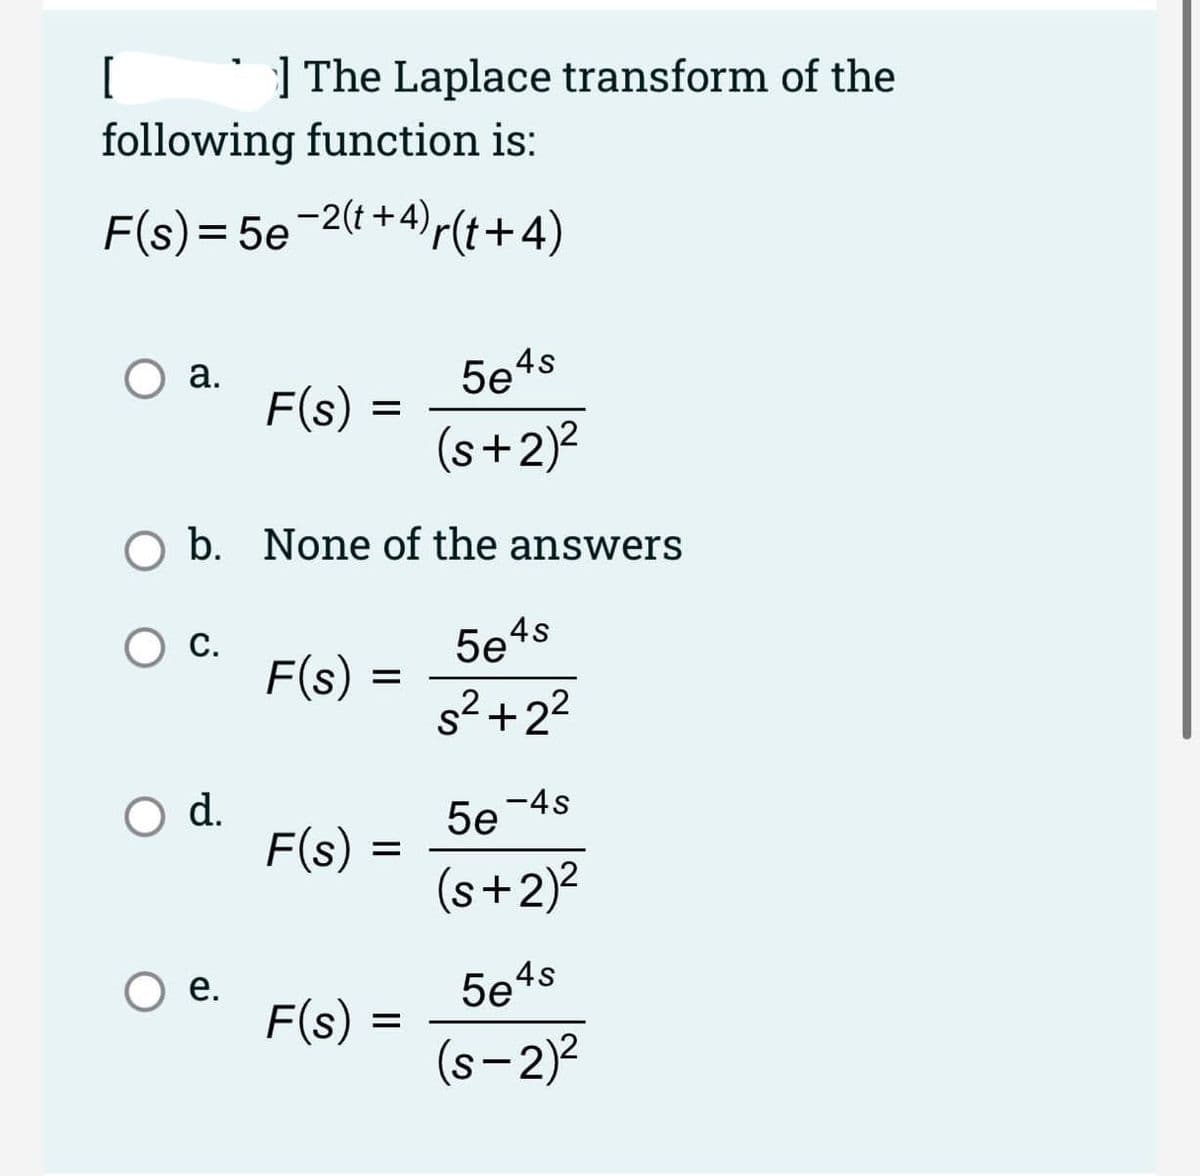 [
| The Laplace transform of the
following function is:
F(s) = 5e-2(t+4)r(t+4)
%3D
а.
F(s)
5e4s
(s+2)?
O b. None of the answers
Ос.
F(s)
С.
5e4s
s2+22
d.
5e -4s
F(s)
(s+2)?
O e.
F(s)
5e4s
(s-2)?
